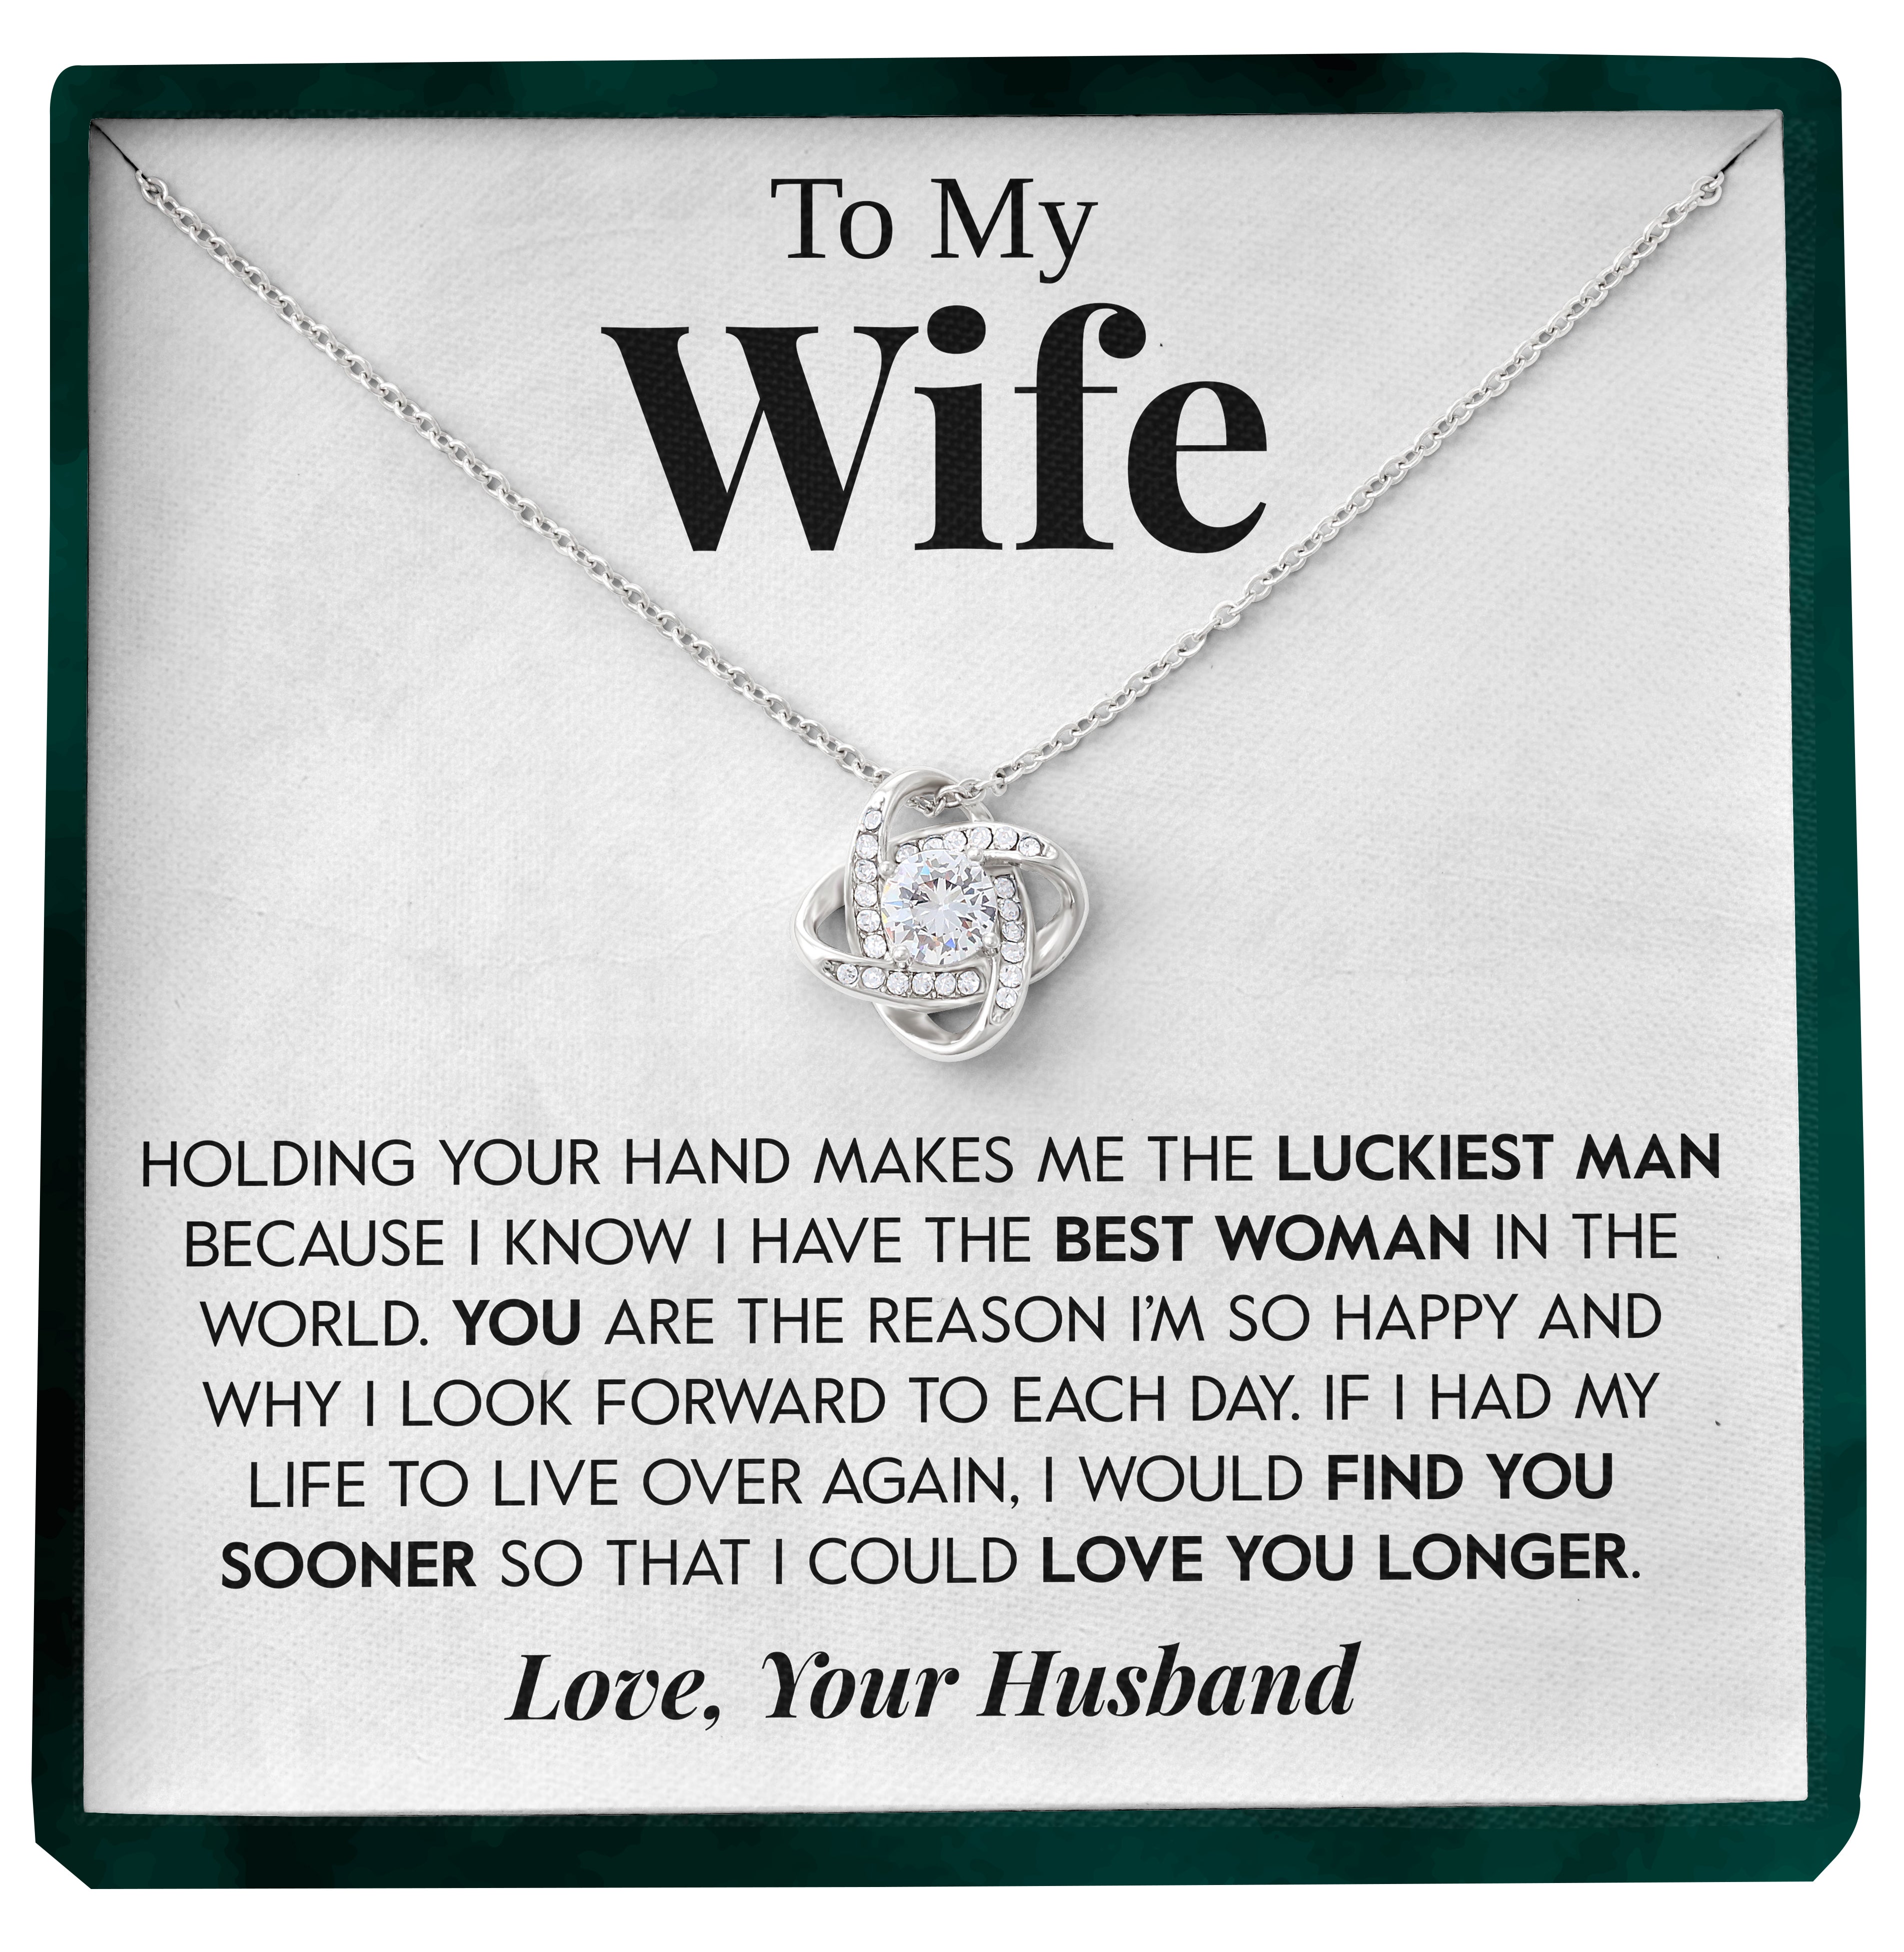 To My Wife | "The Best Woman" | Love Knot Necklace